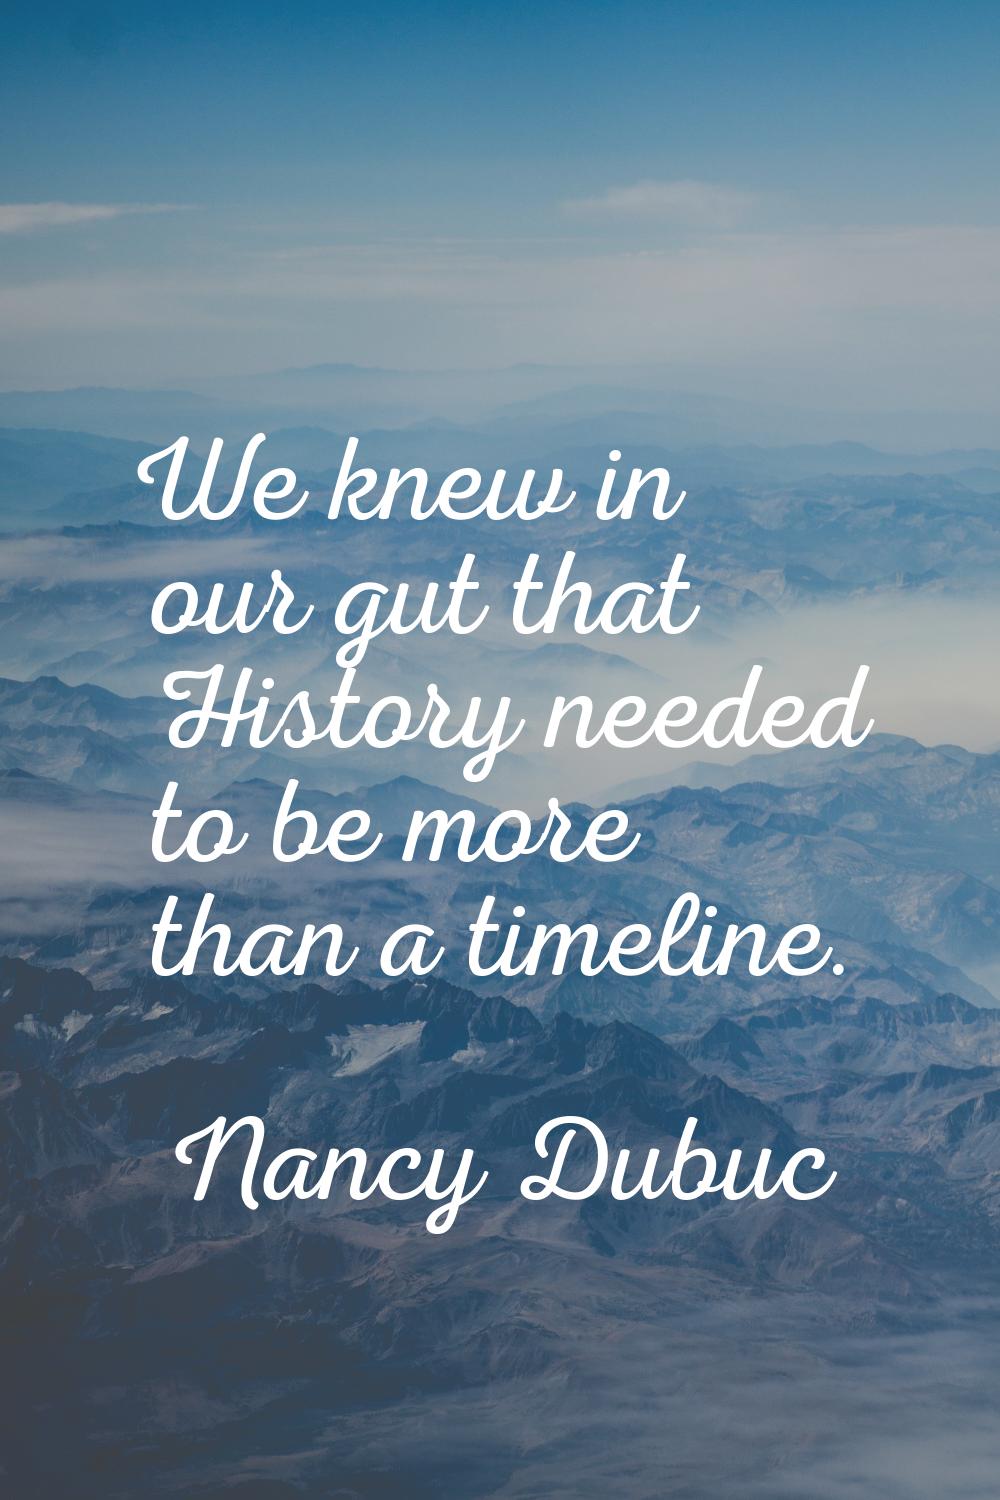 We knew in our gut that History needed to be more than a timeline.